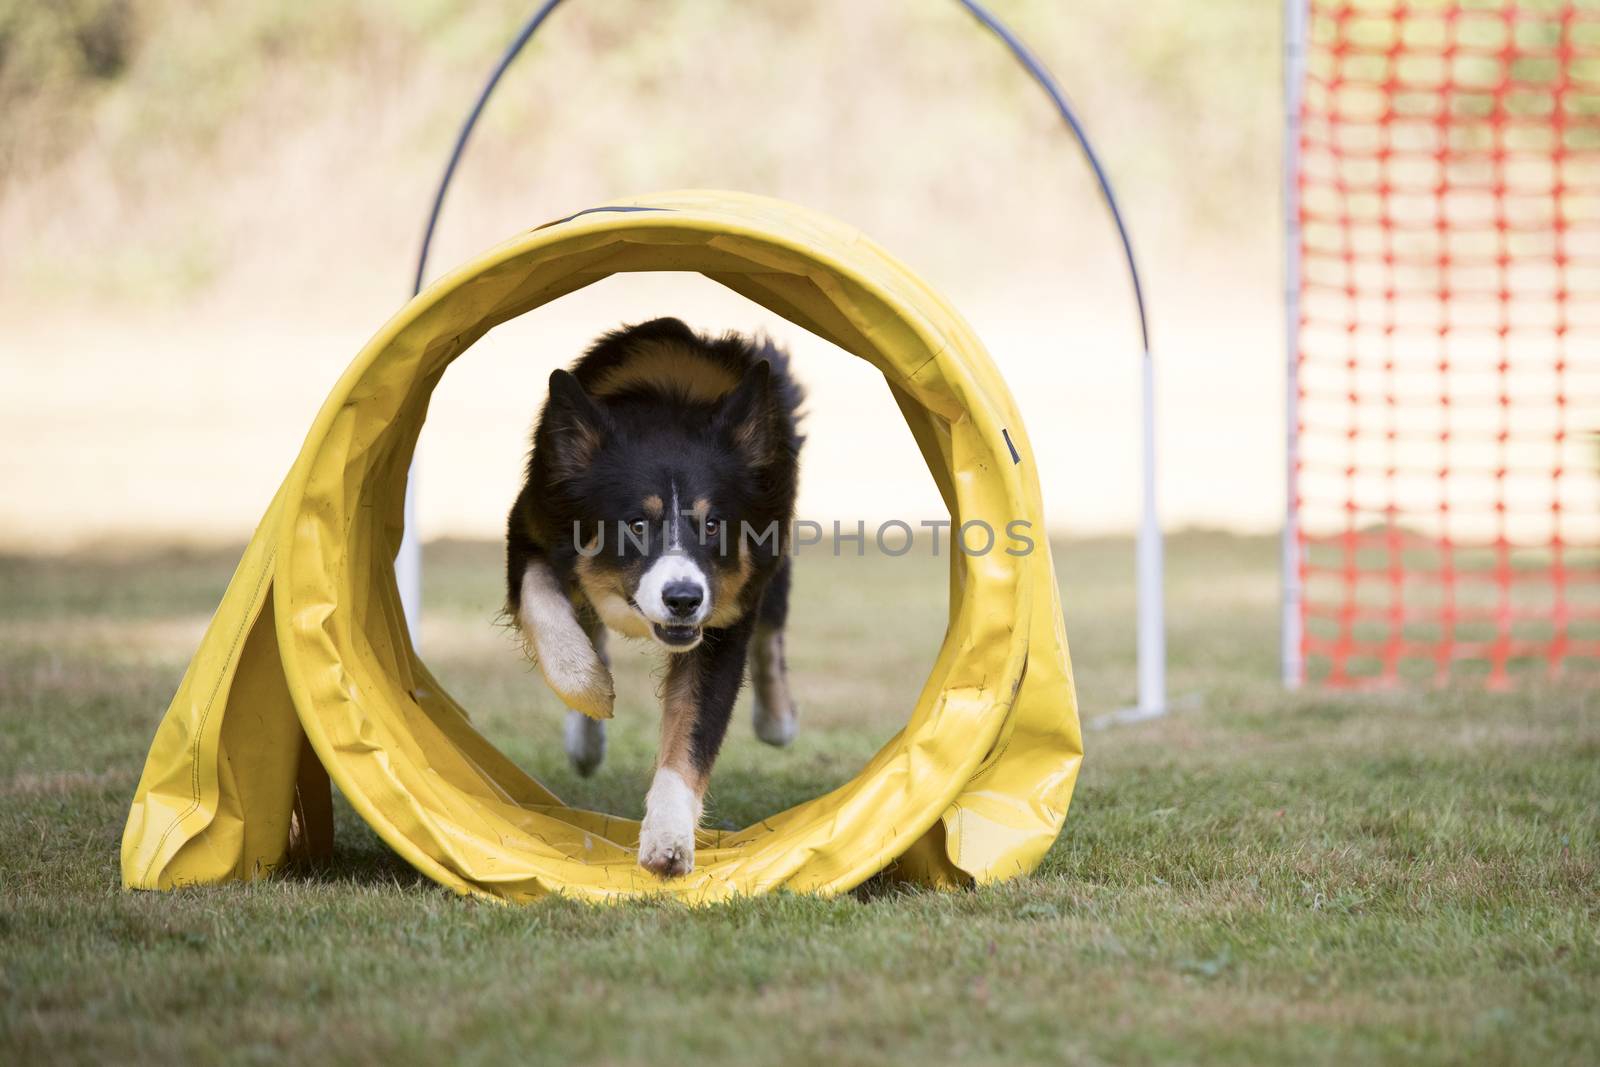 Border Collie training hoopers